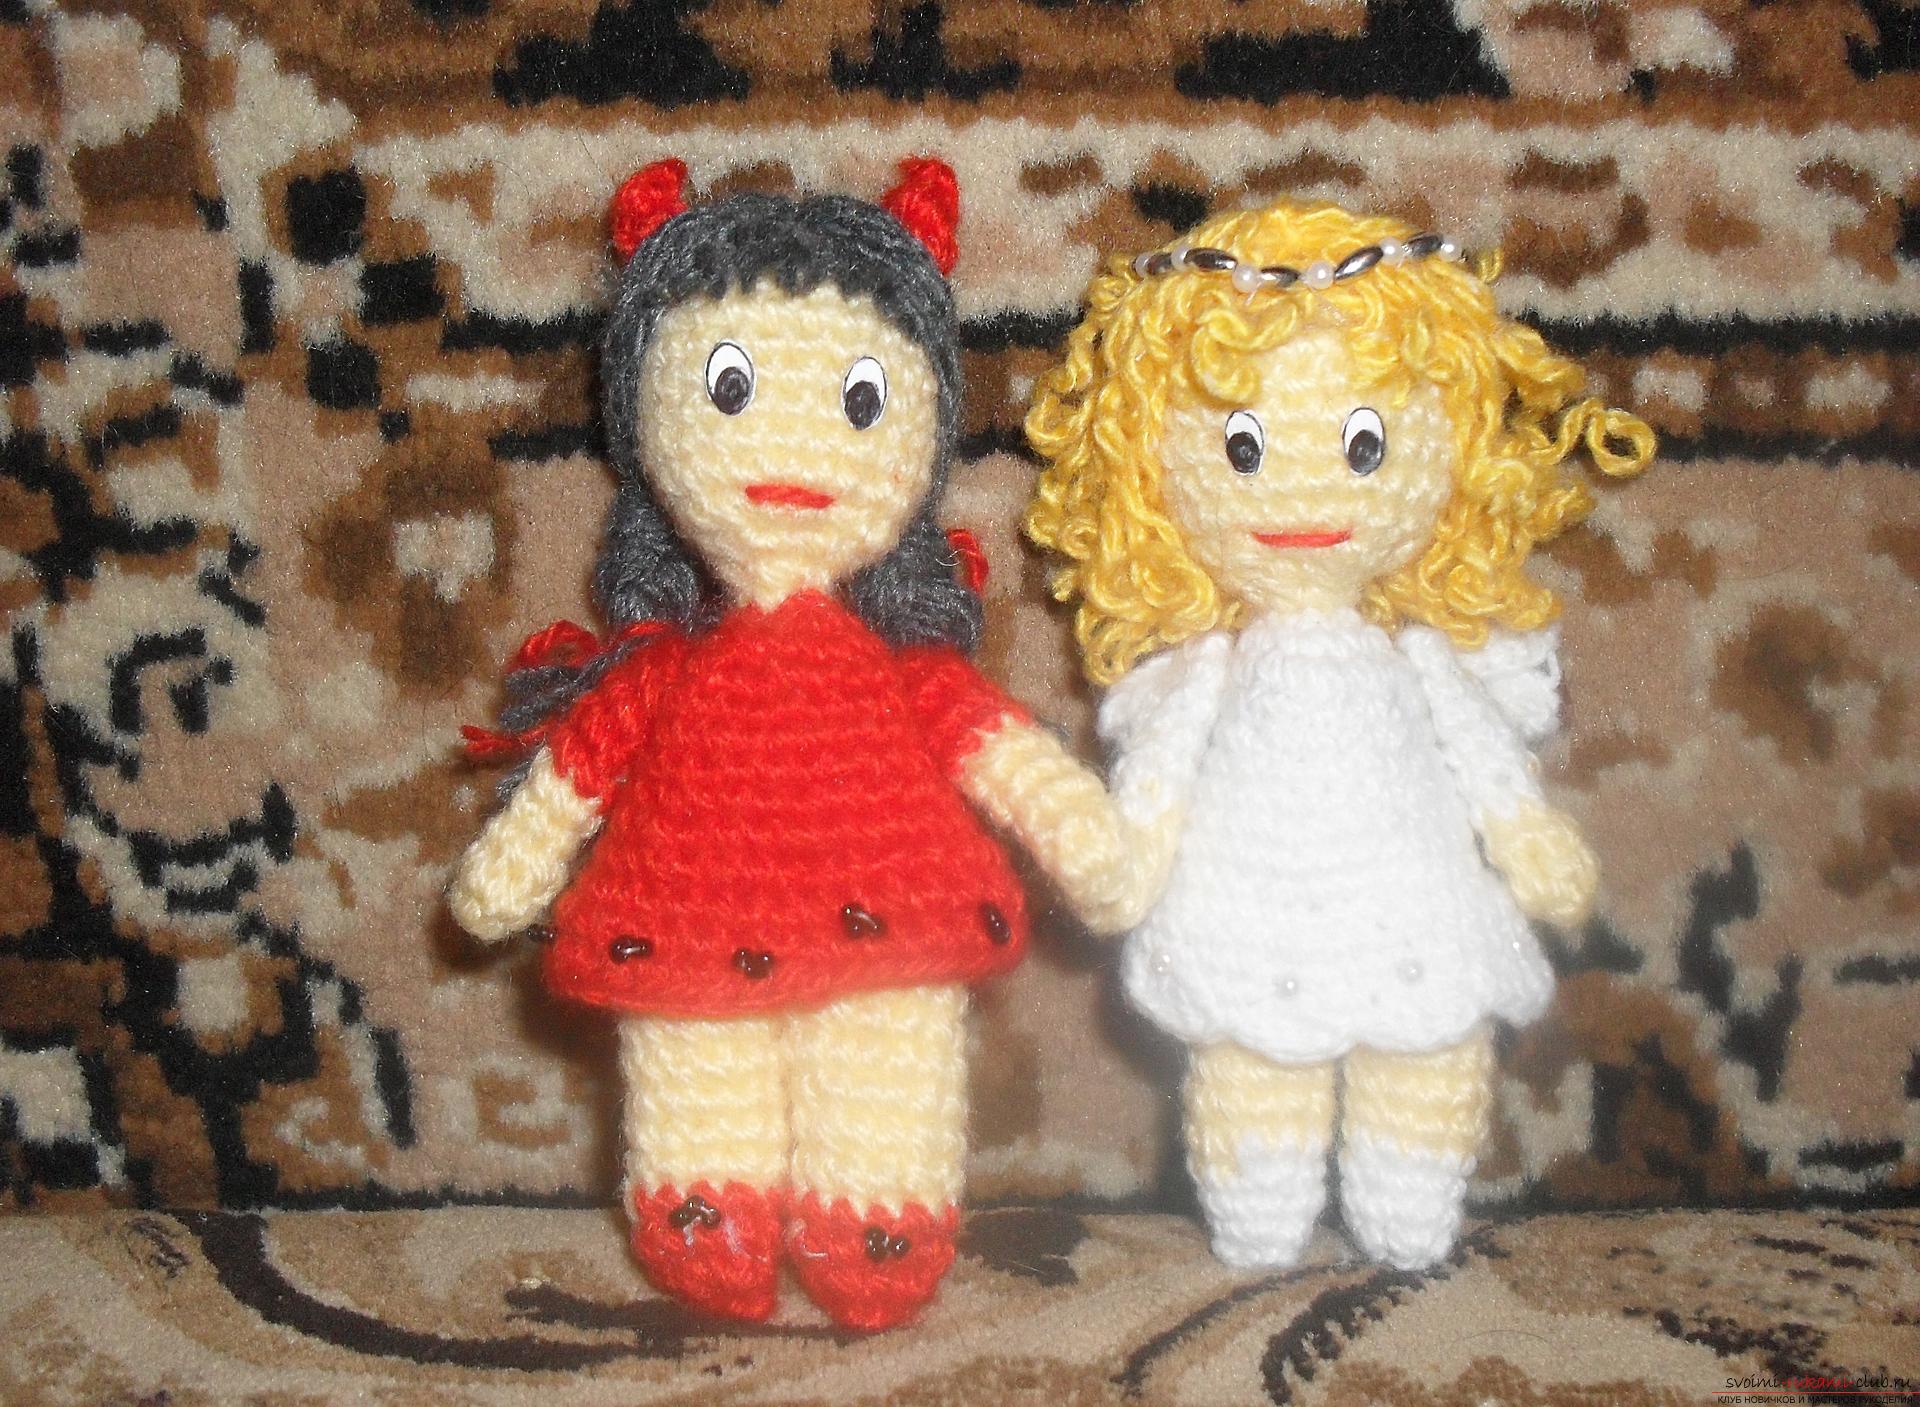 This work is an idea for creativity and needlework by one's own hands. Such crocheted crocheted dolls are an excellent gift .. Photo # 1